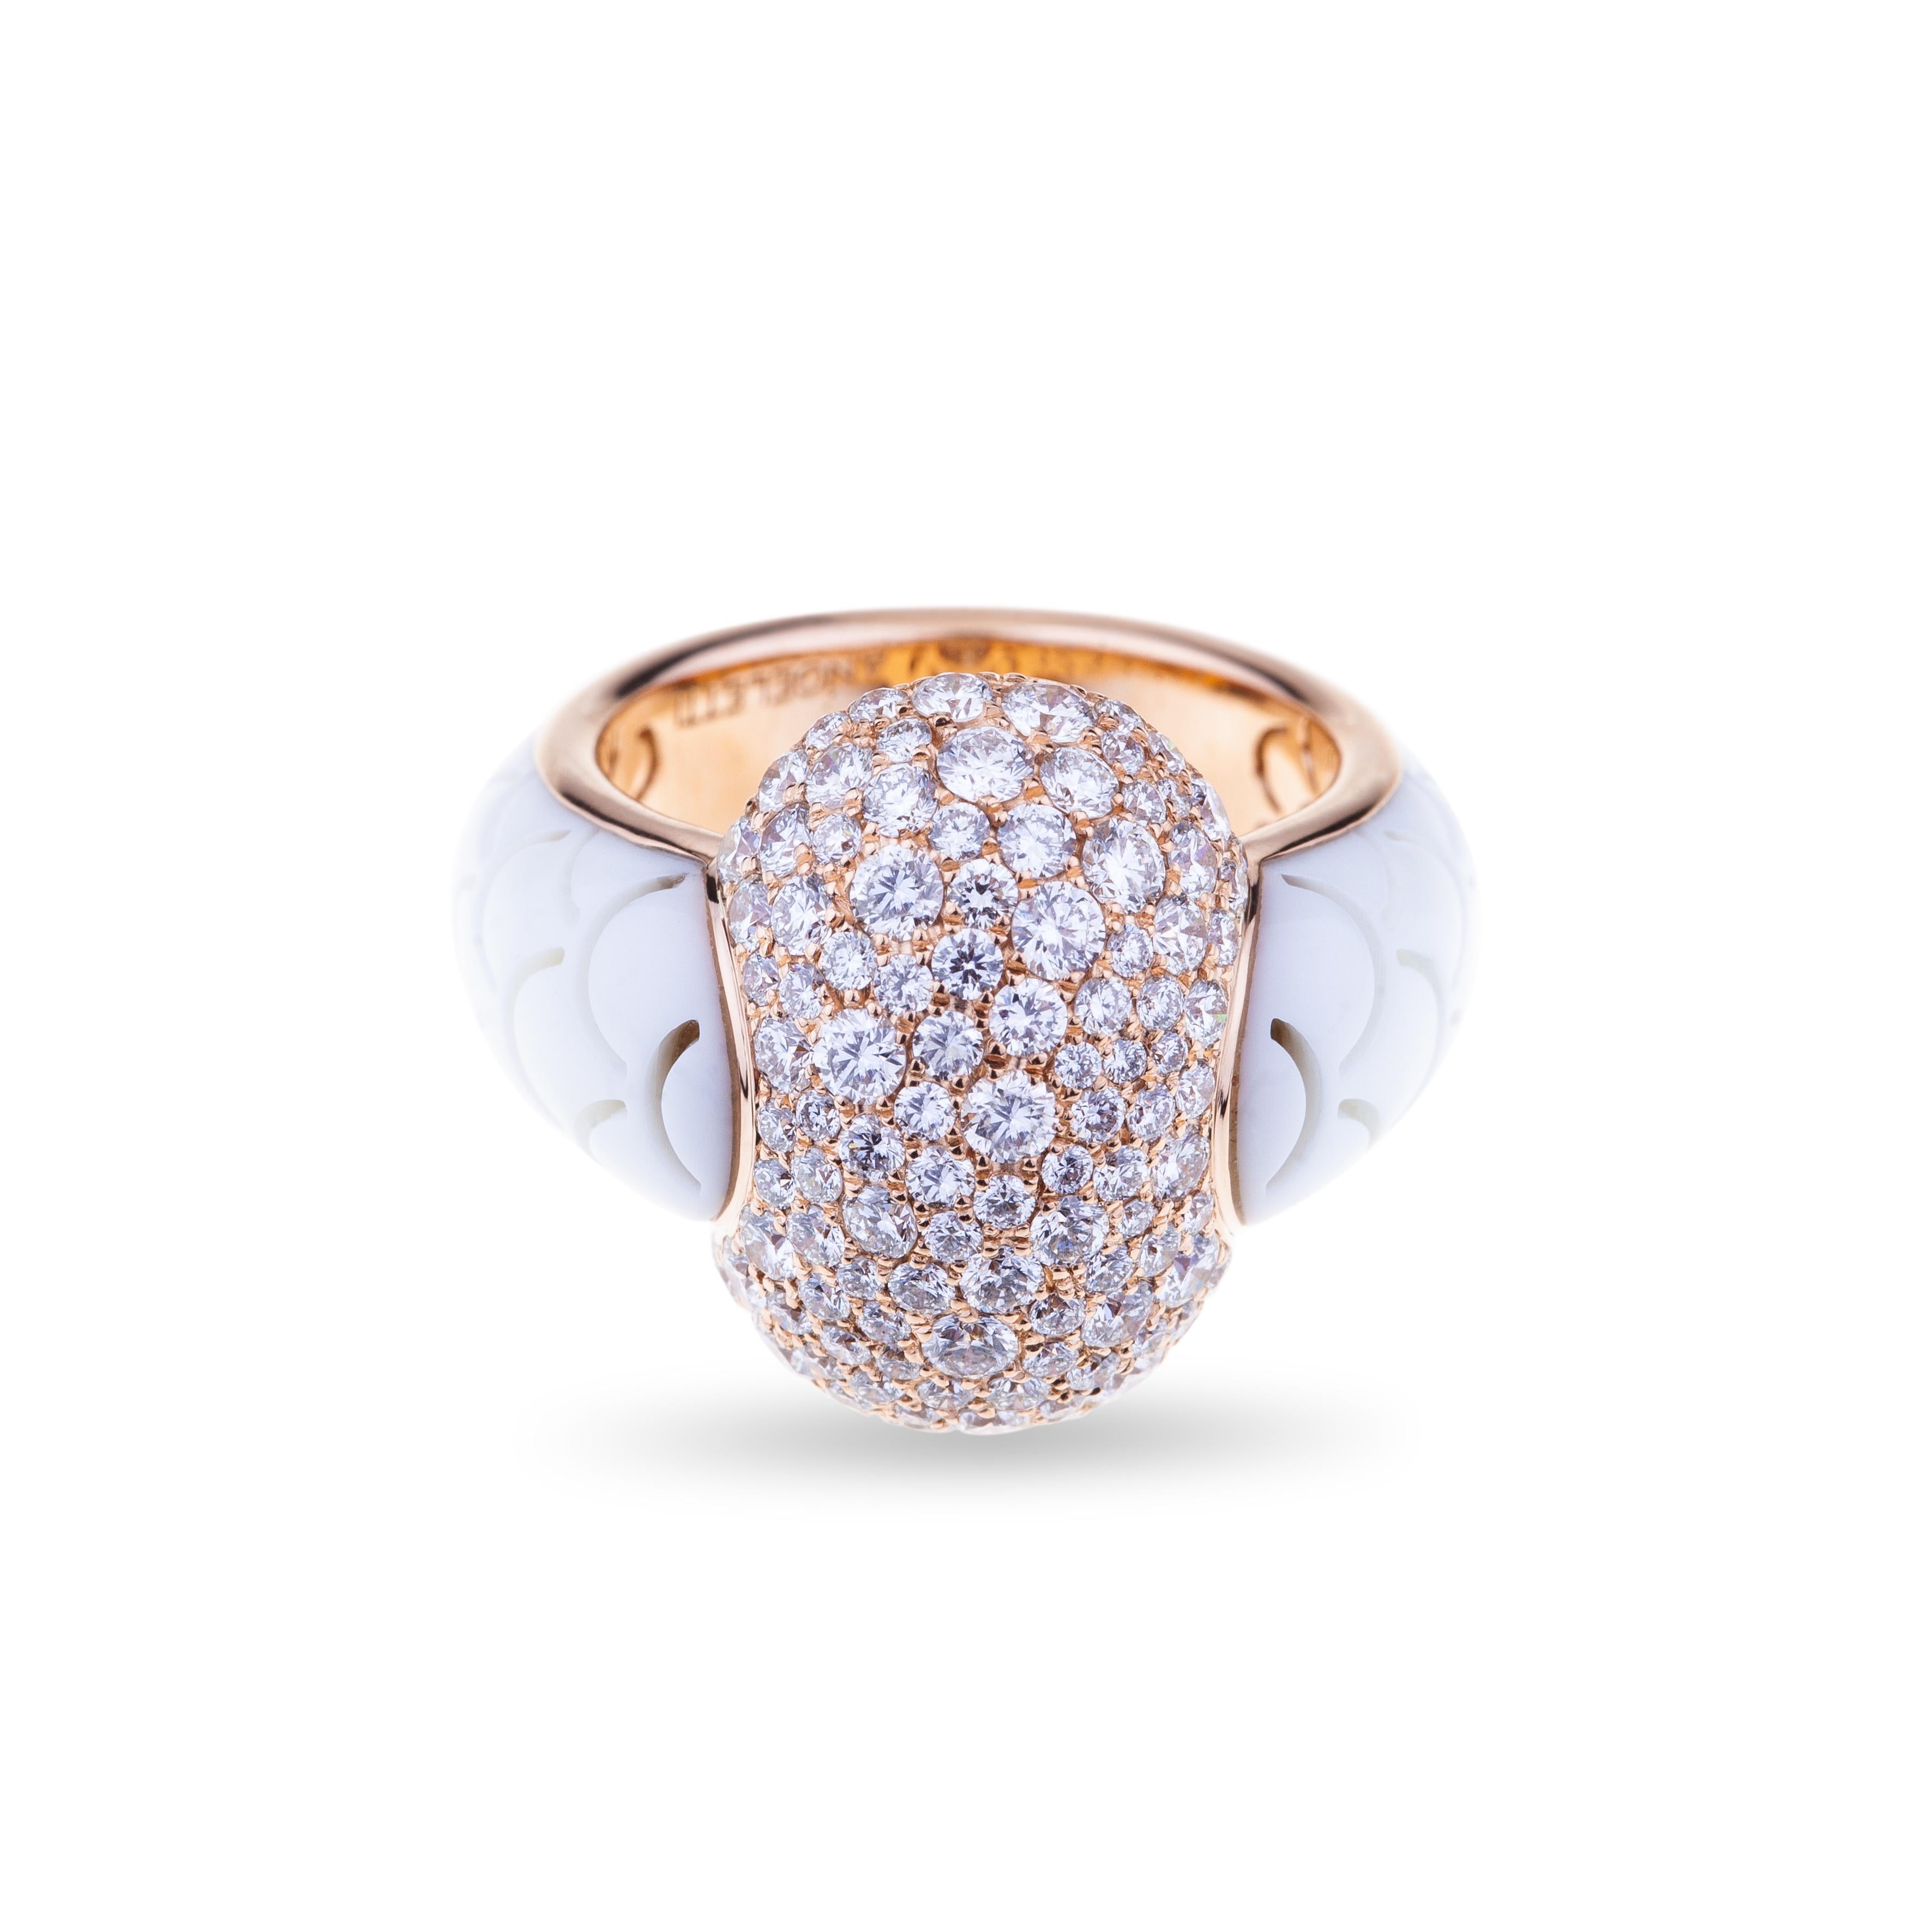 Embrace by Angeletti. Ceramique and Rose Gold Ring With Full Cabochon of Diamonds
Full cabochon of Diamonds ct. 2.21. On the side, white ceramique with Wave design. Gold Weight is Around gr. 9.9.
Designed and Manifactured in Rome.
Very Confortable